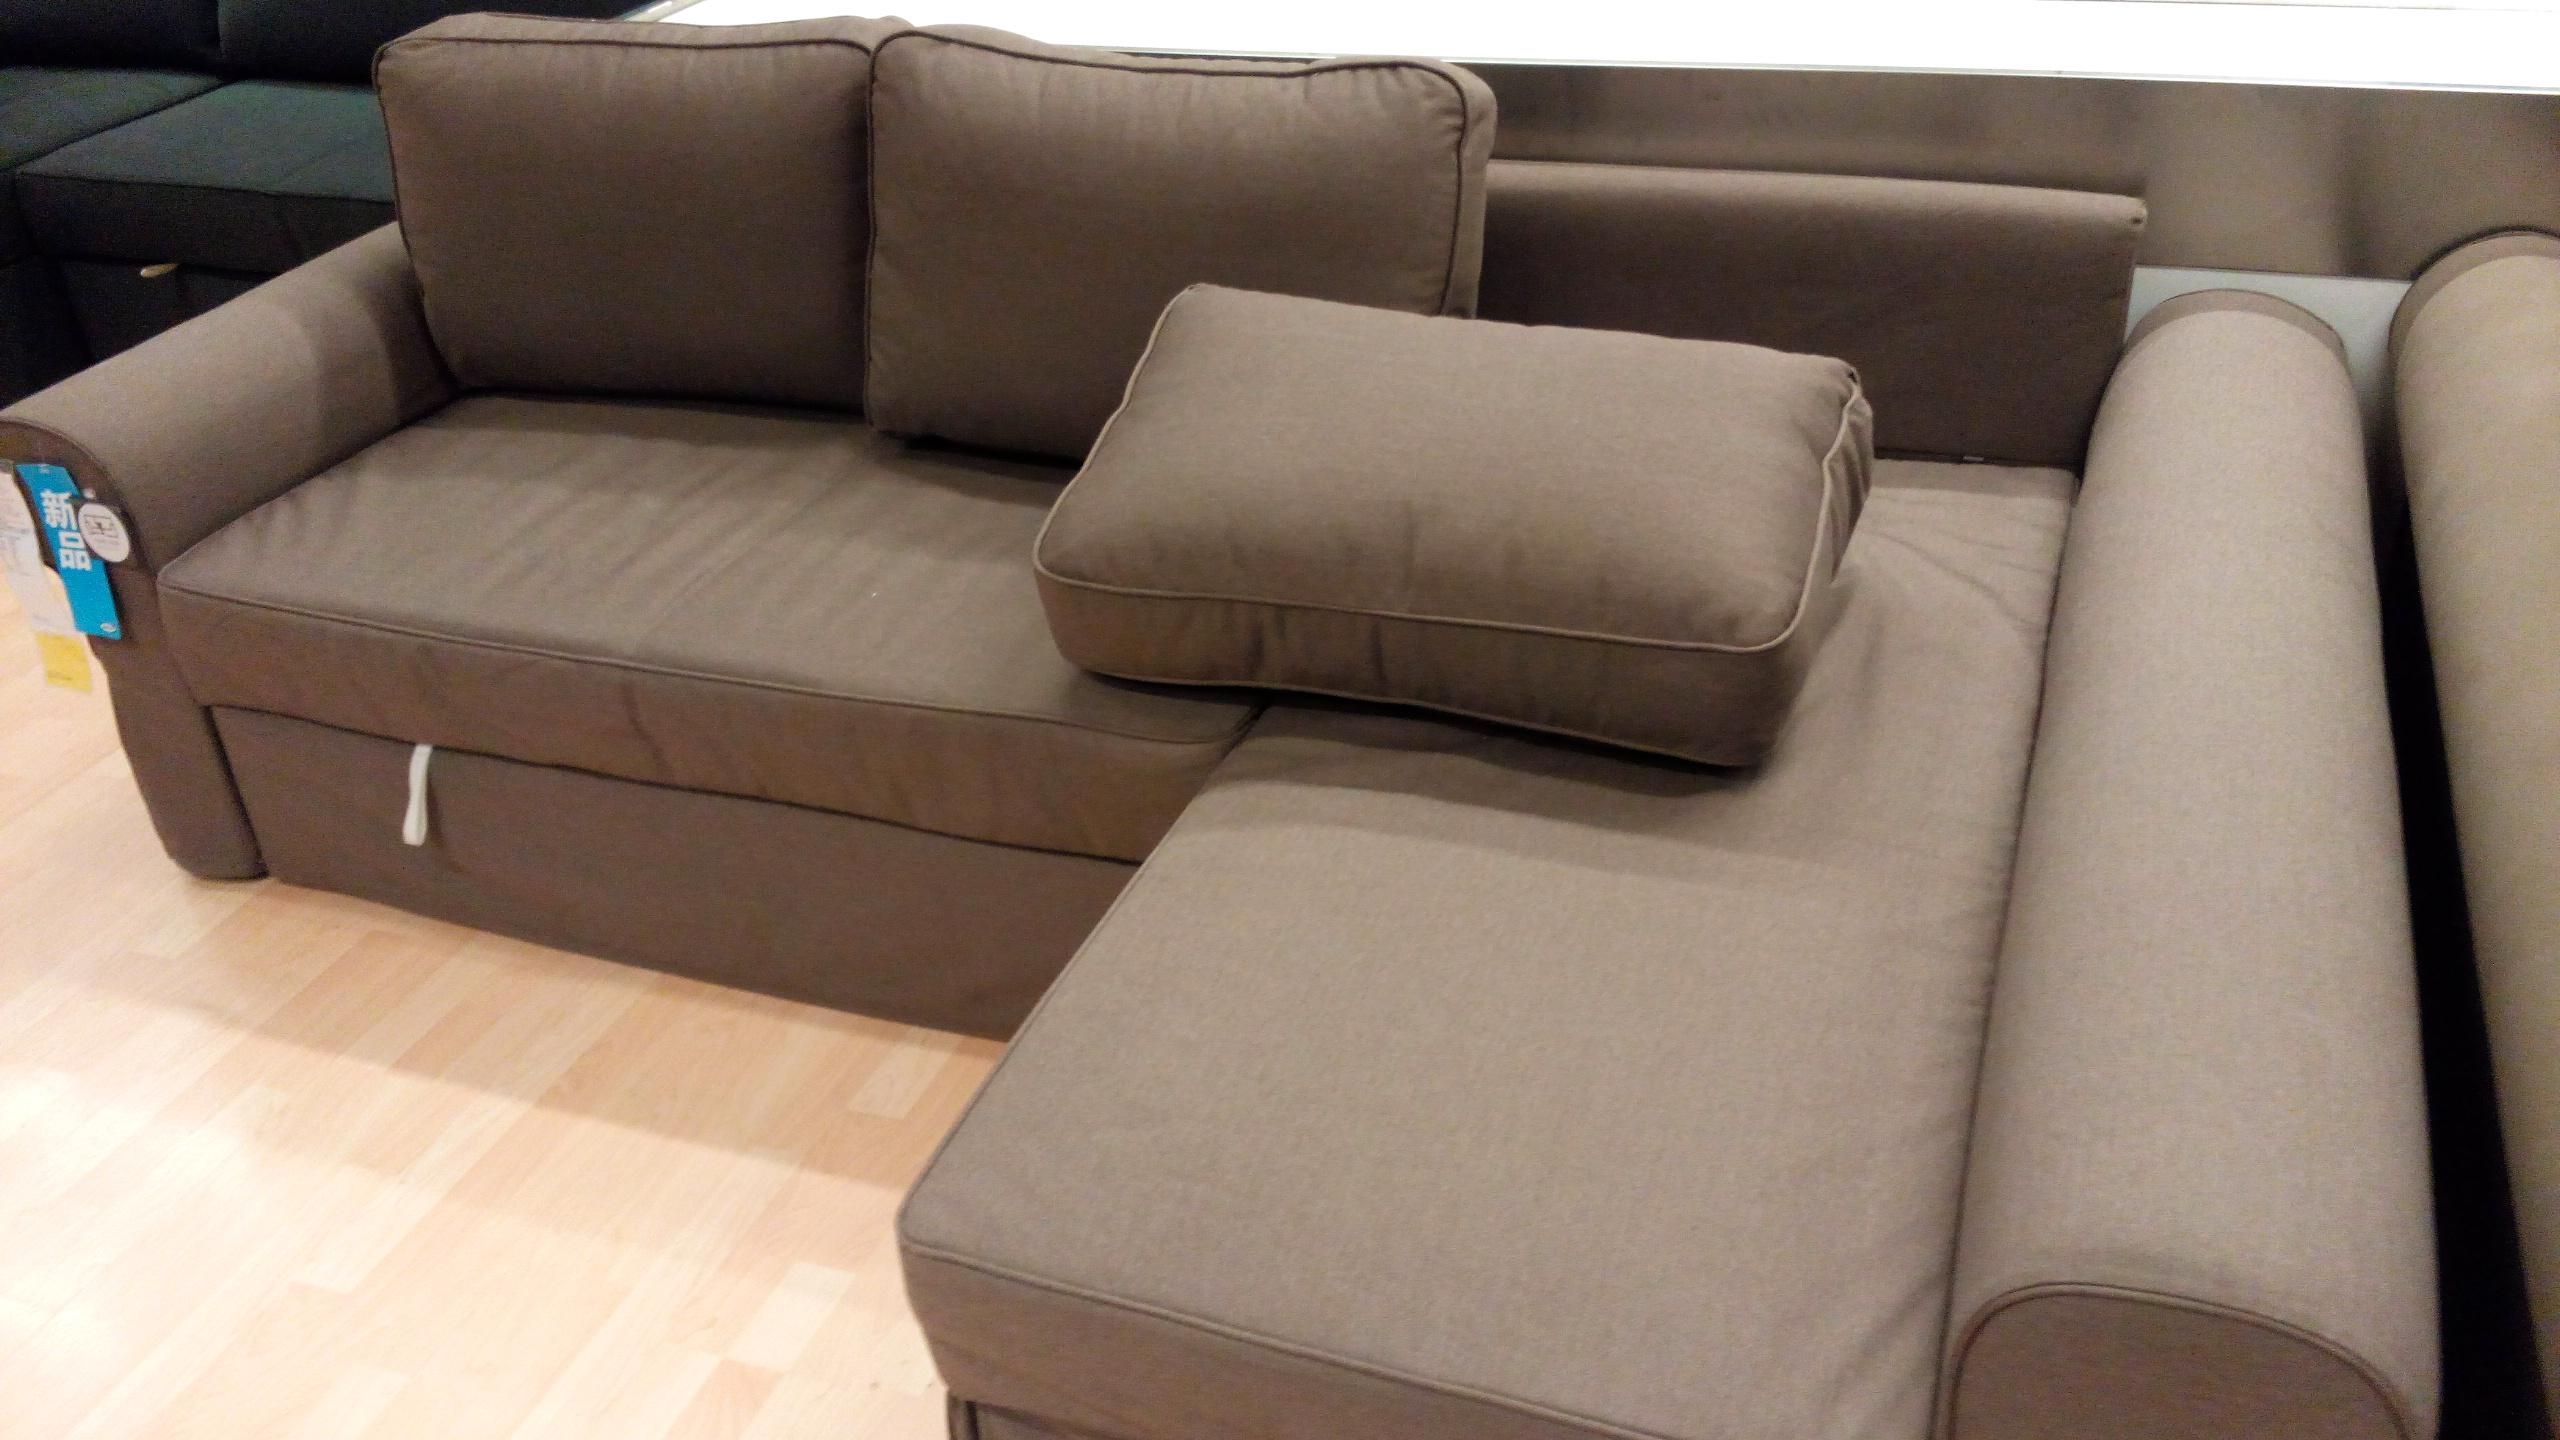 Ikea Vilasund And Backabro Review – Return Of The Sofa Bed Clones! Inside Manstad Sofa Bed Ikea (View 5 of 20)